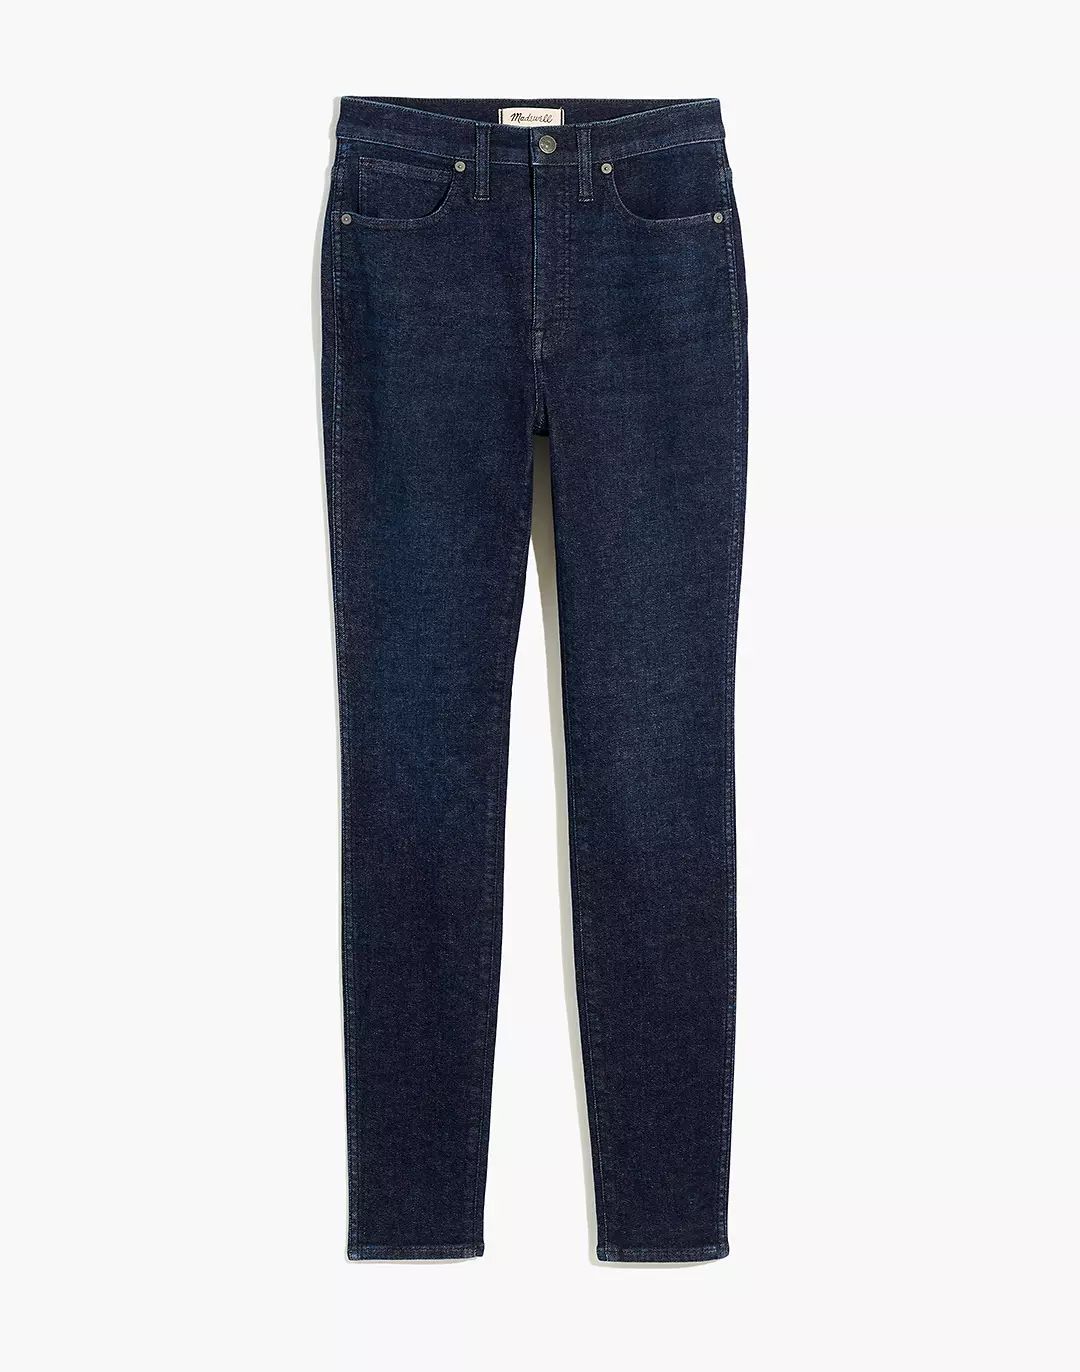 10" High-Rise Skinny Jeans in Bensley Wash | Madewell